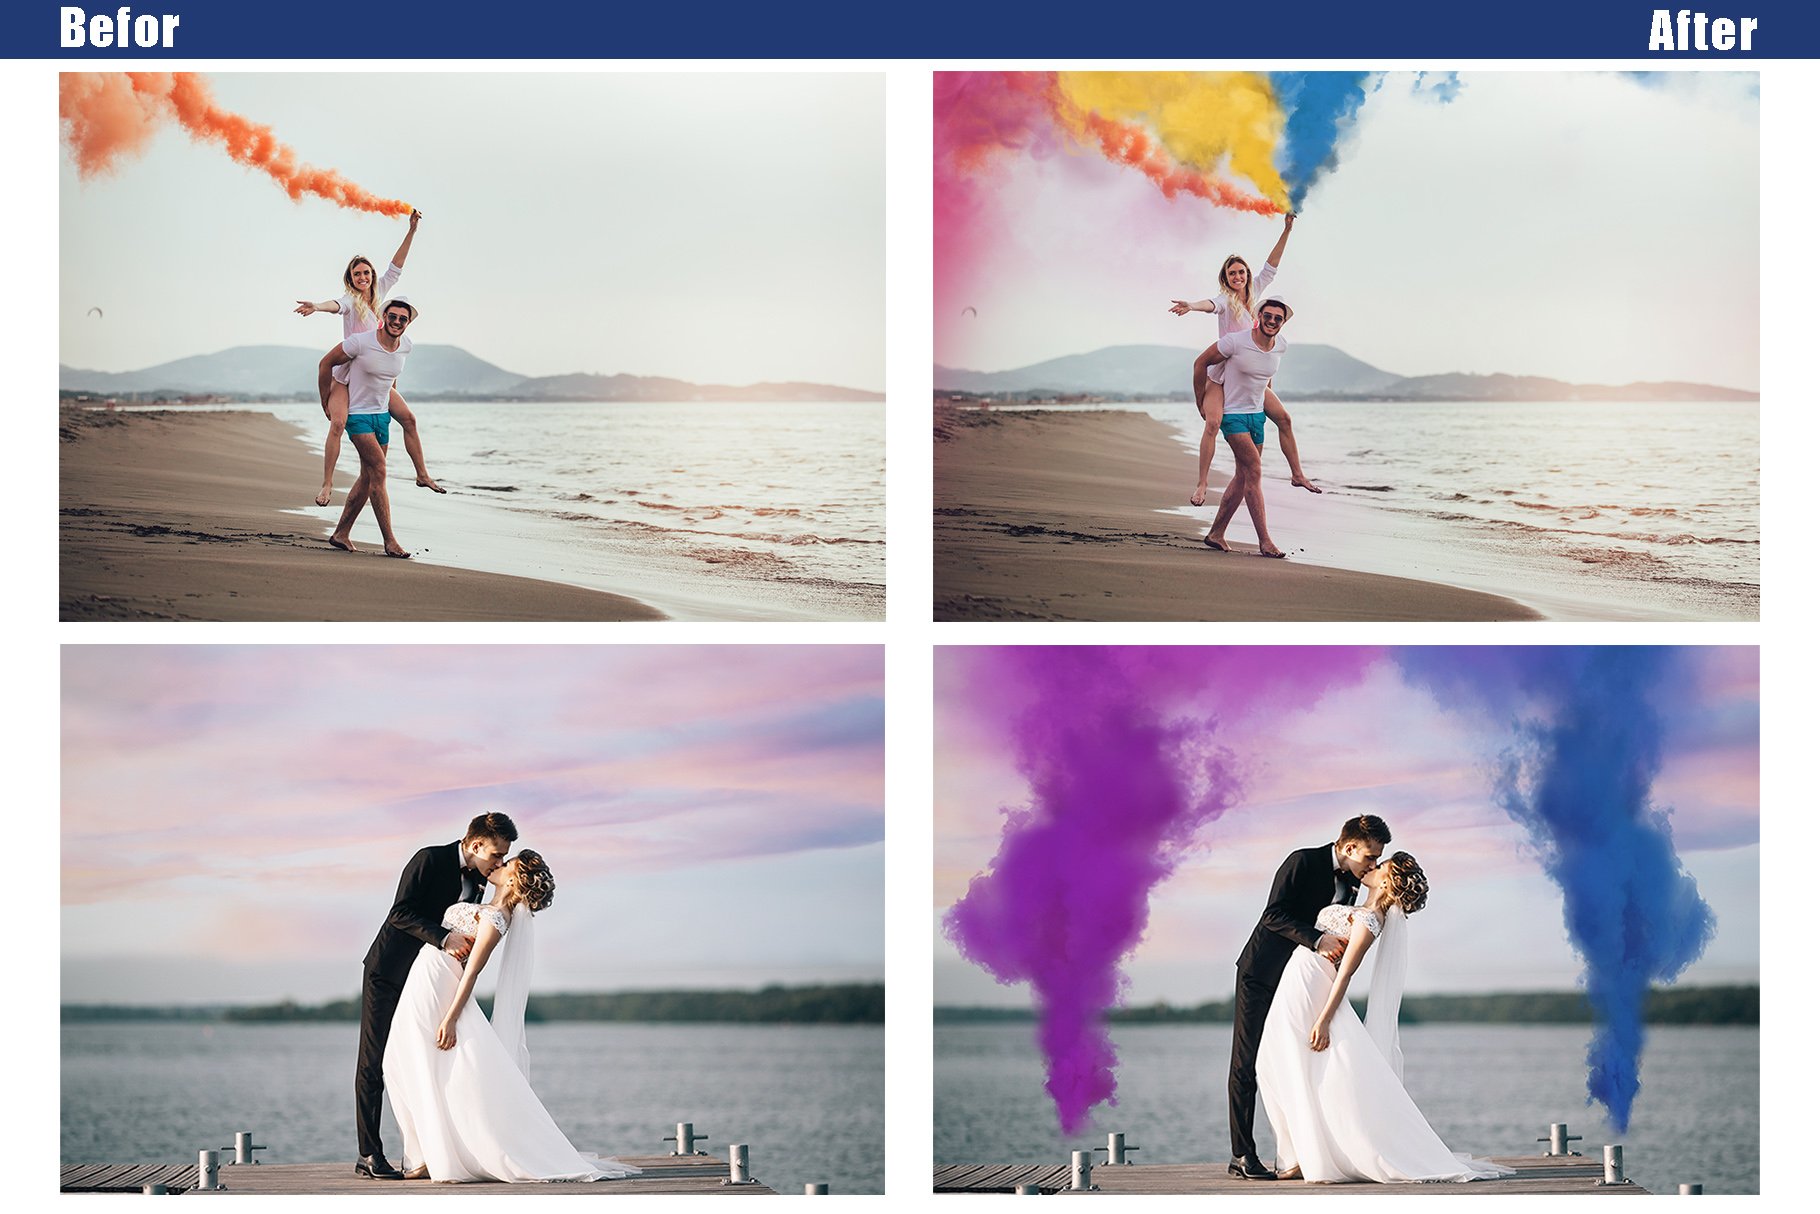 35 Smoke Bomb Overlays, colorful fogpreview image.